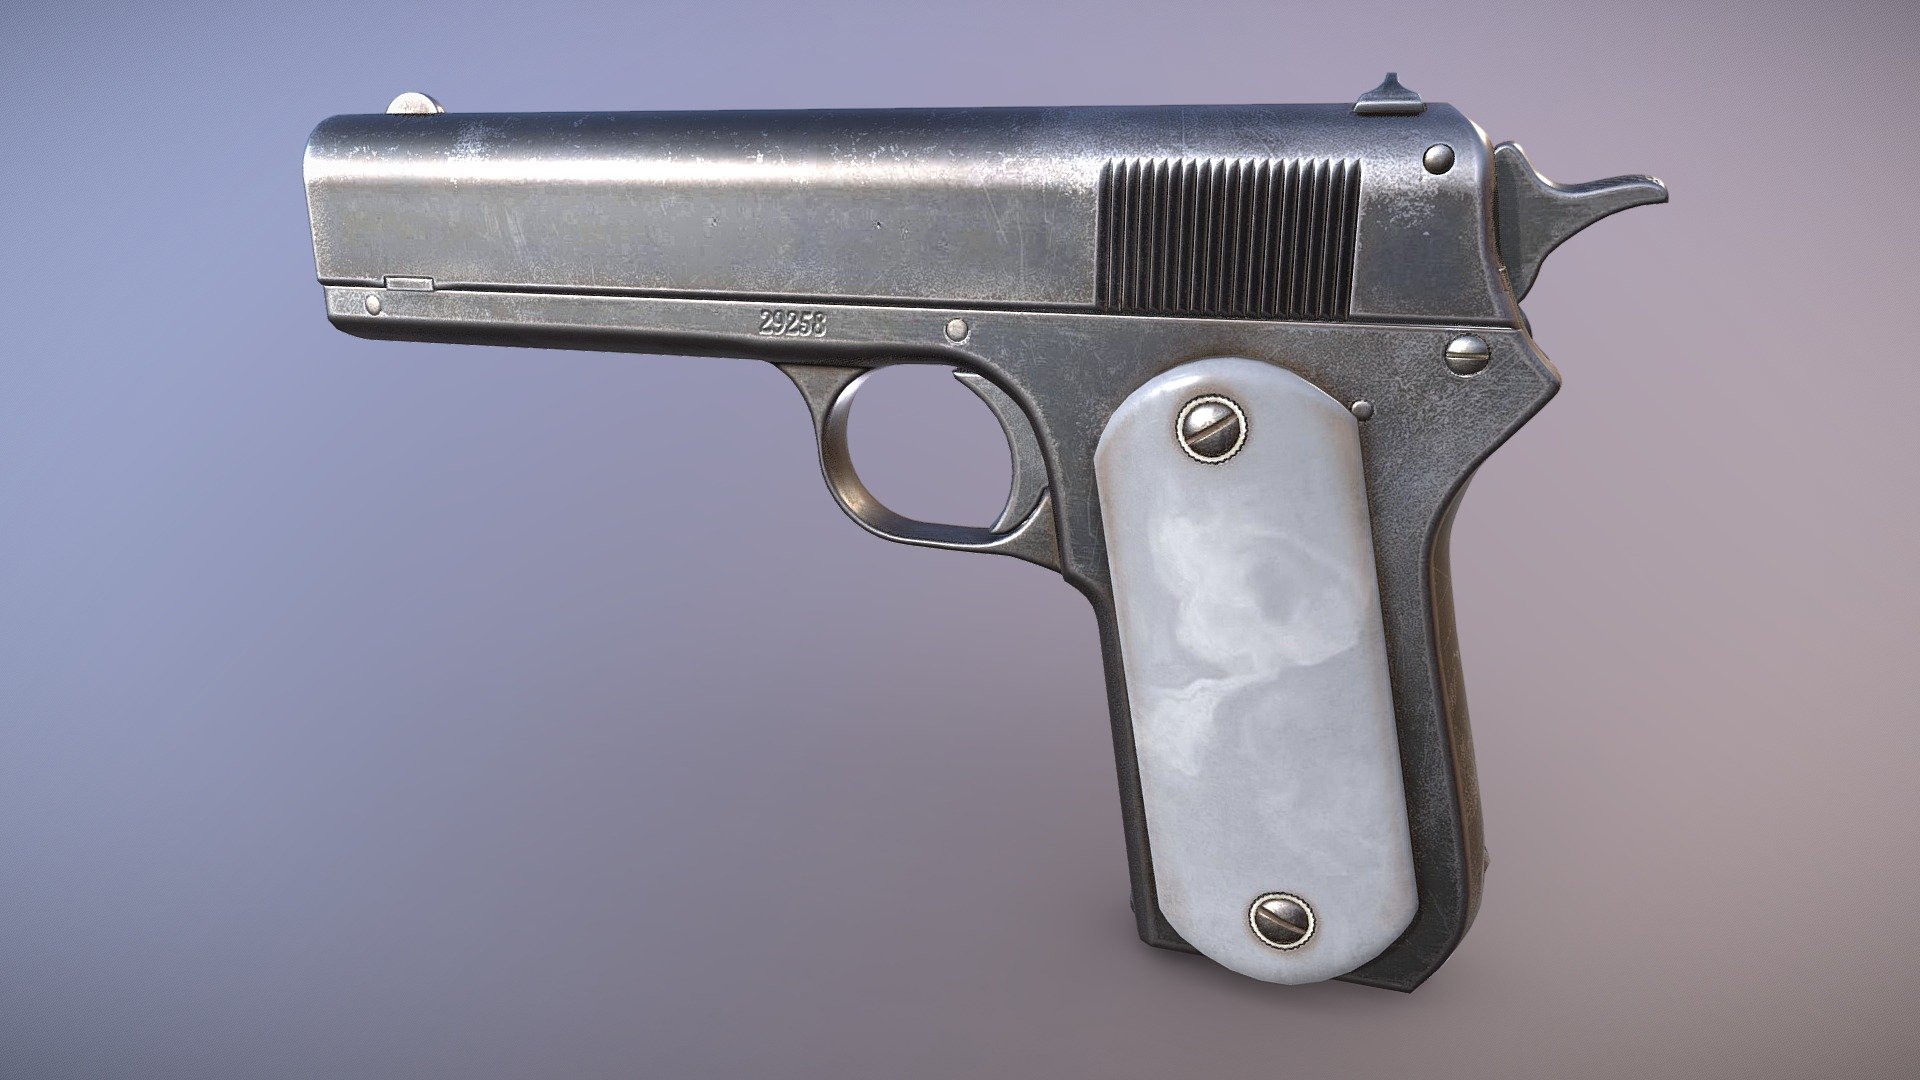 1903 Pocket Hammer pistol designed for PBR engines.

Originally modeled in 3ds Max 2019. Download includes .max, .fbx, .obj, metal/roughness PBR textures, textures for Unity and Unreal Engines, and additional texture maps such as curvature, AO, and color ID.

Specs




Scaled to approximate real world size (centimeters)

Mesh is in tris and quads, no n-gons.

Textures

1 Material: 2048x2048 Base Color, Roughness, Metallic, Normal, AO

Unity Engine 5 Textures: AlbedoTransparency, MetallicSmoothness, Normal, Occlusion

Unreal Engine 4 Textures: BaseColor, Normal, RoughnessMetallicAO - 1903 Pocket Hammer - Buy Royalty Free 3D model by Luchador (@Luchador90) 3d model